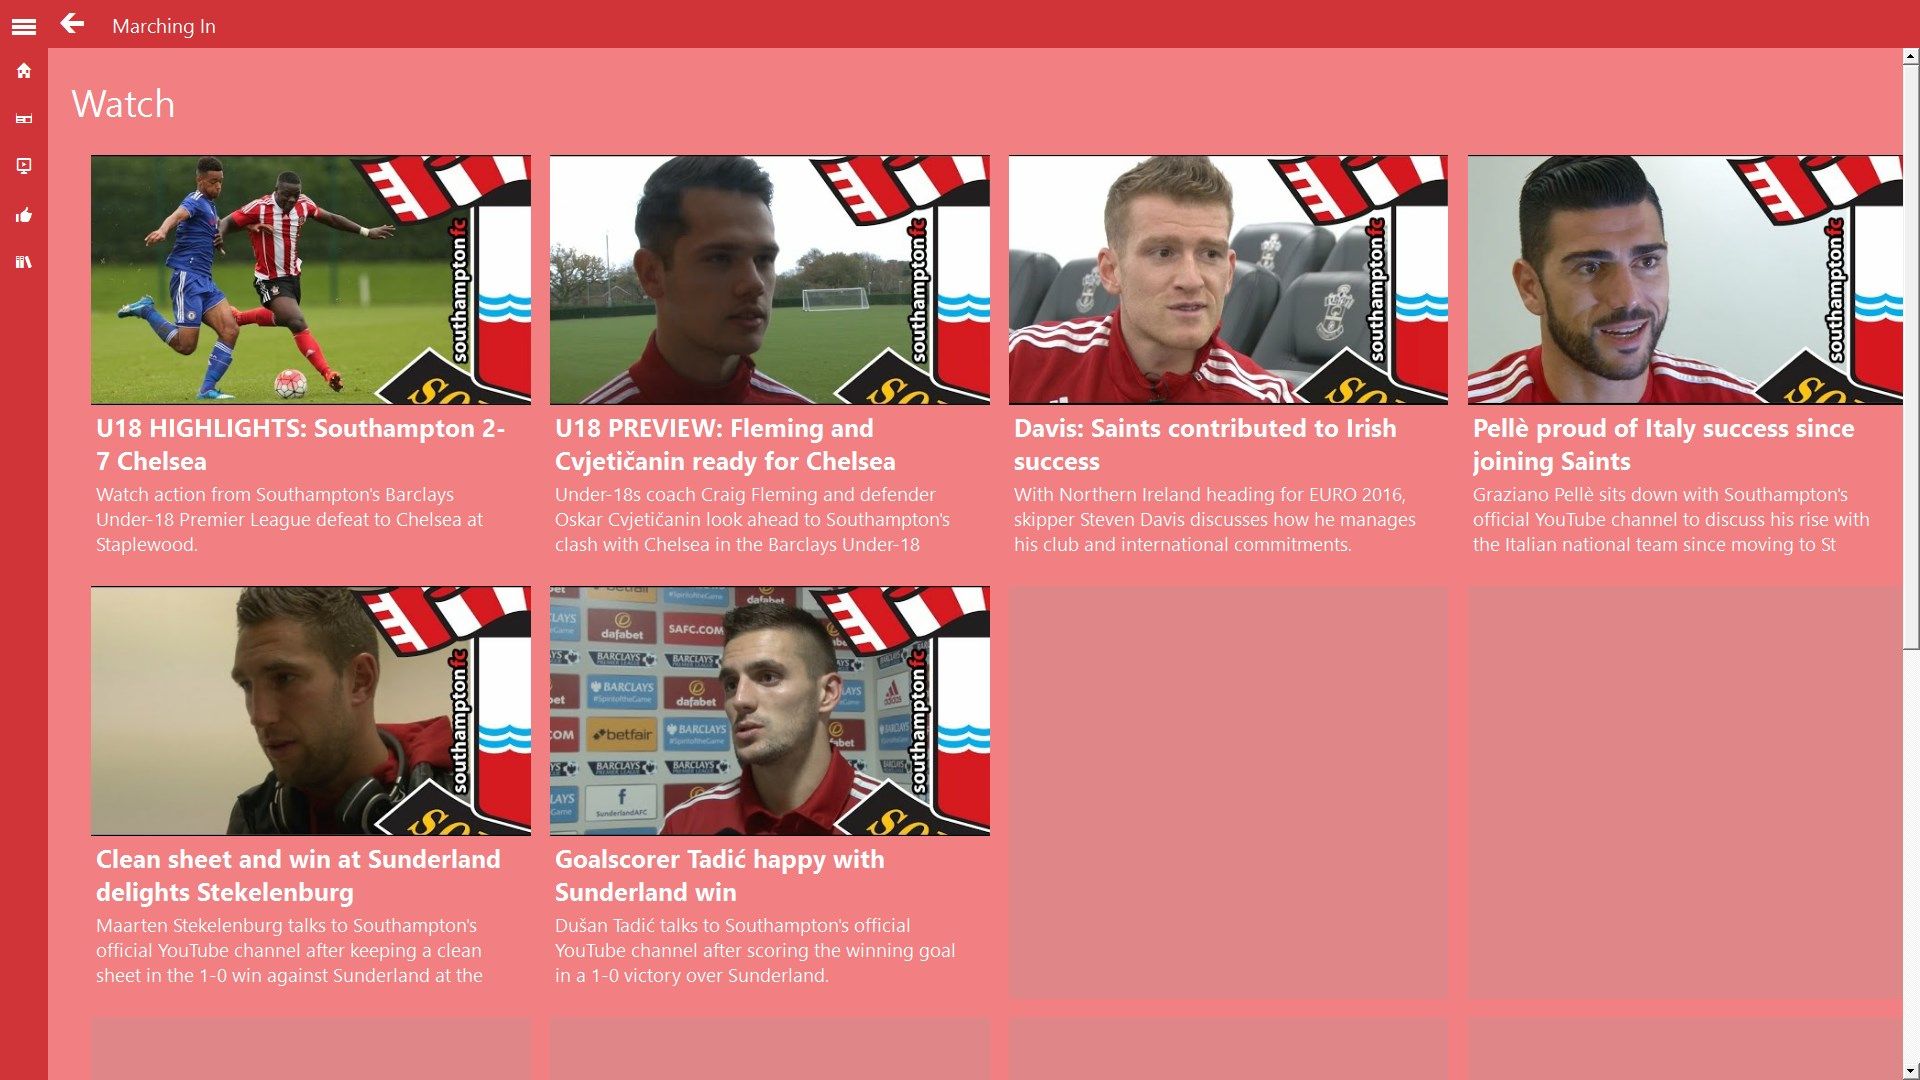 Watch all the latest post-match interviews, player interviews and more right from the app.